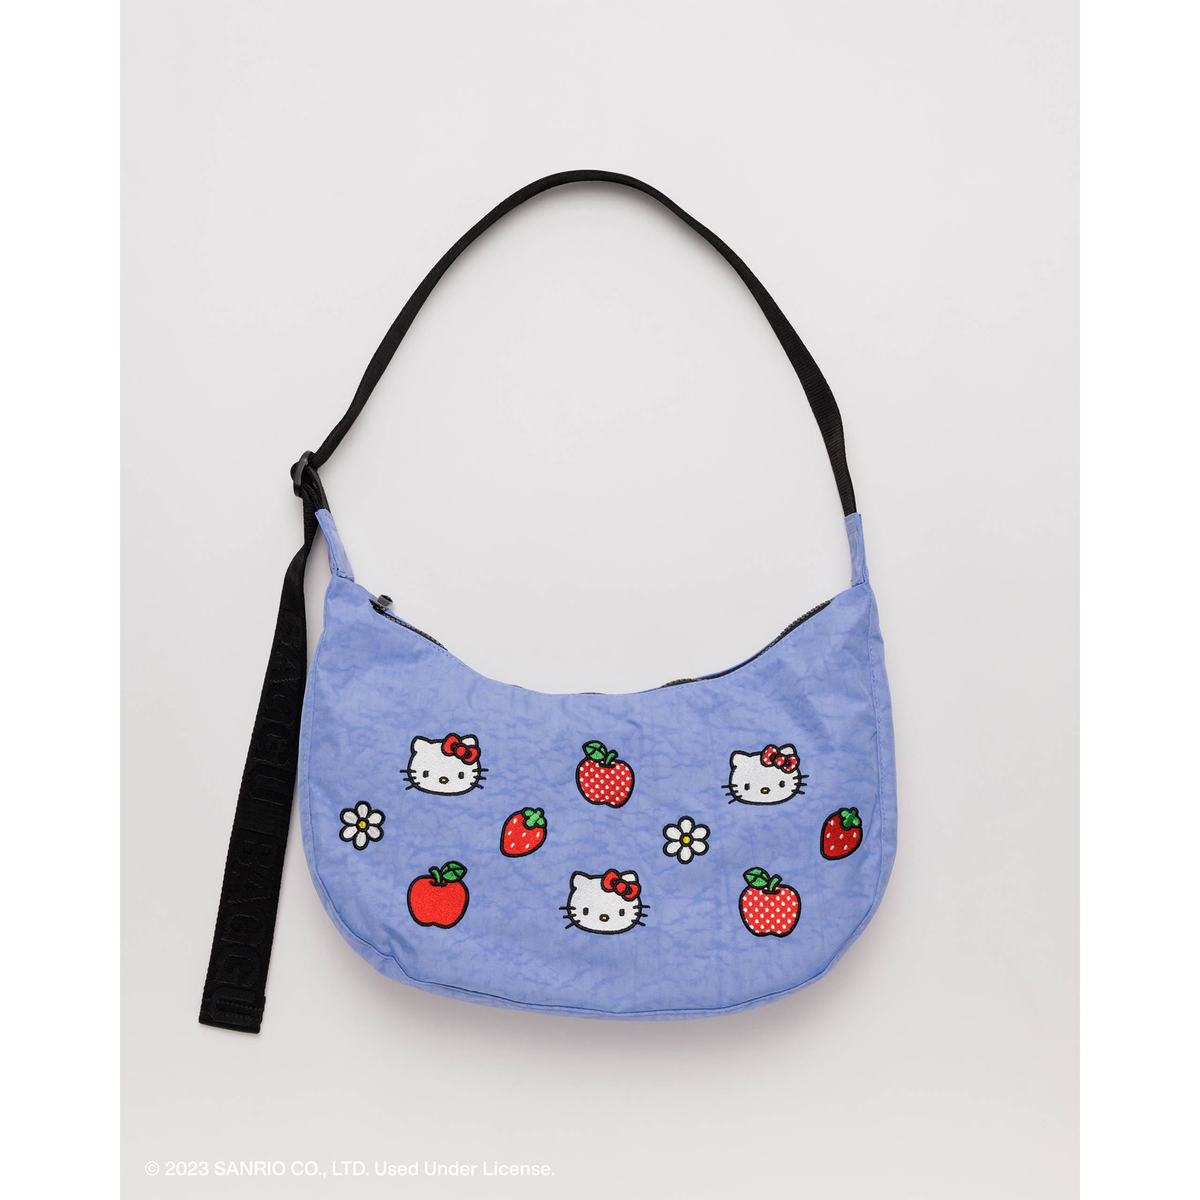 BAGGU X Hello Kitty Small Heavyweight Canvas Tote Bag | Urban Outfitters